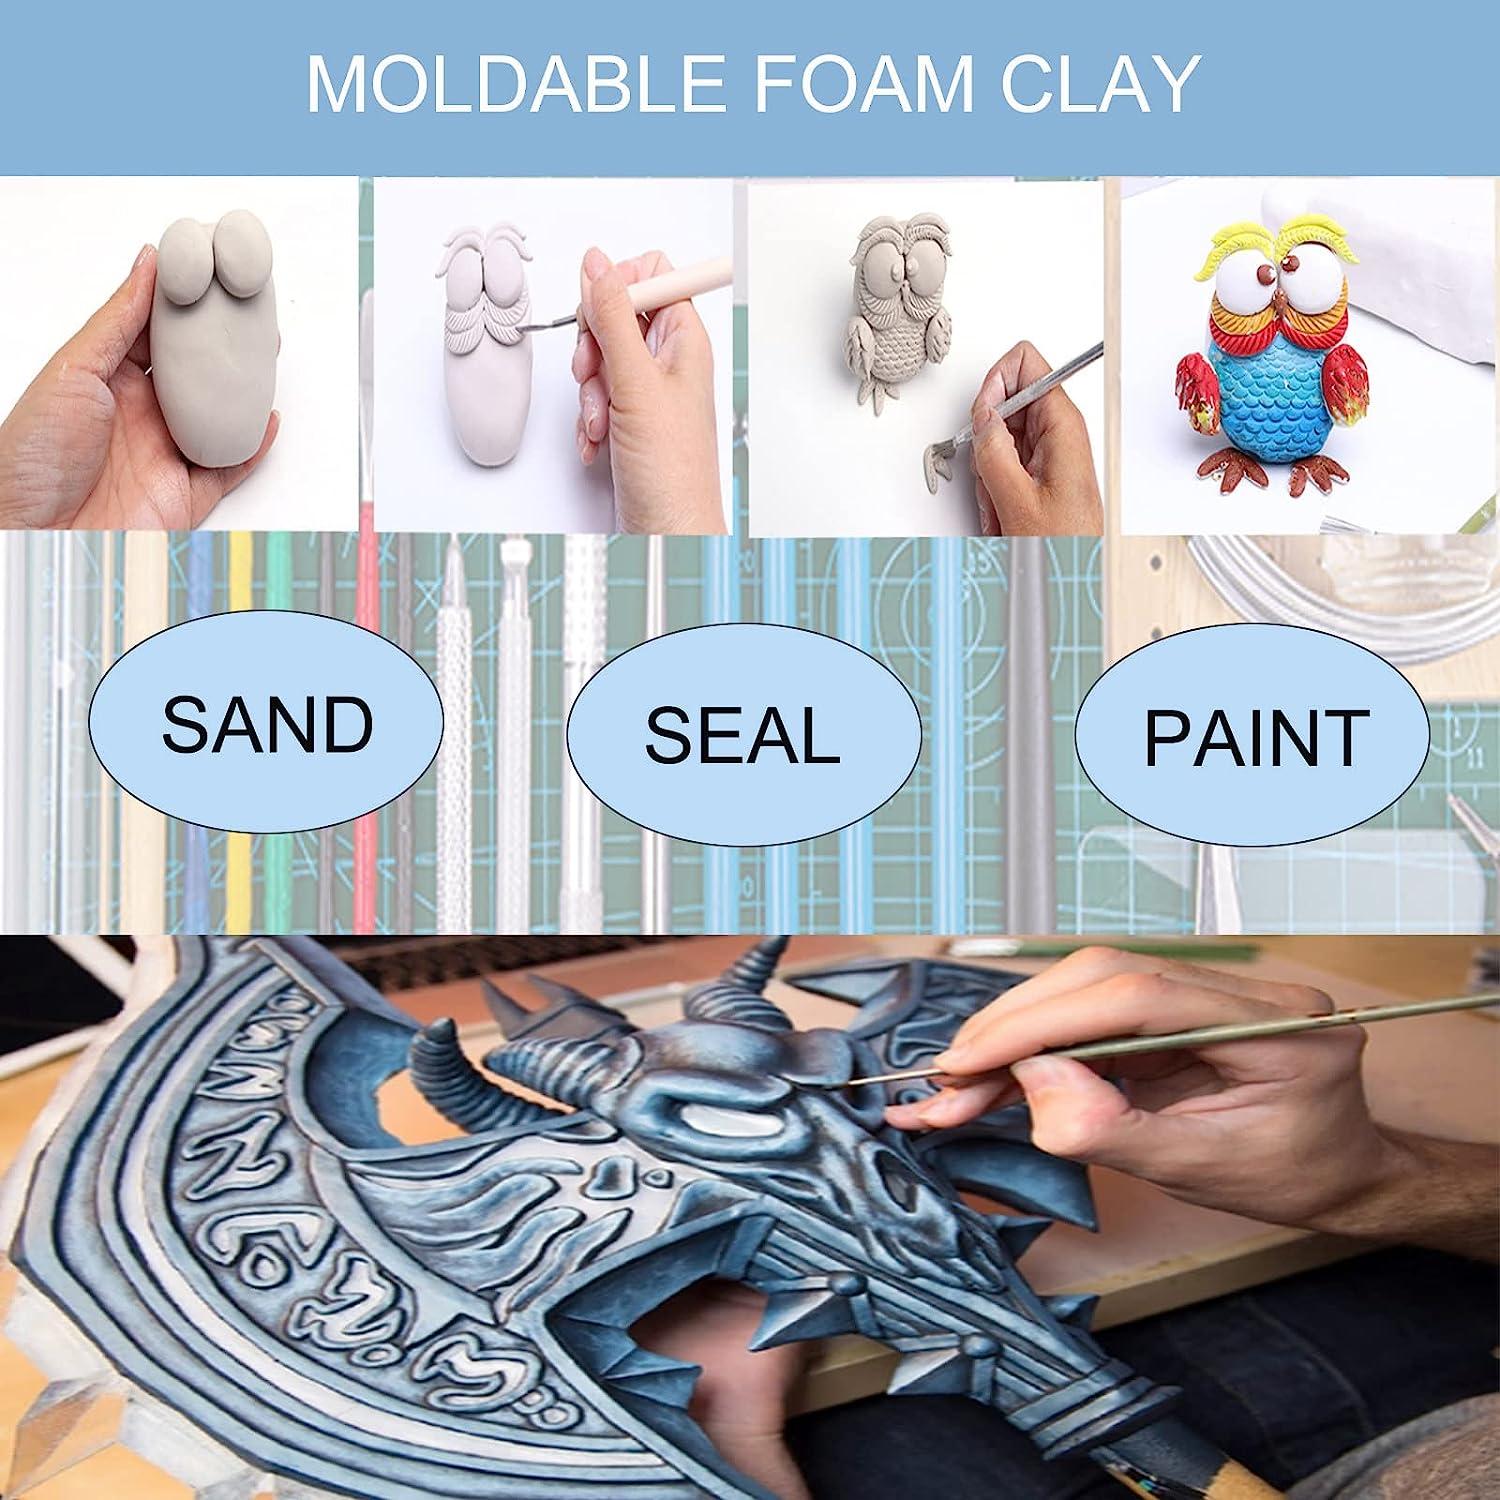  Modeling Foam Clay, 500g Soft Air Dry Clay for Adults  Lightweight DIY Creative Art Supplies with Sculpting Tools,Suitable for  Cosplay/Crafts/Design/Shaping-Grey : Everything Else